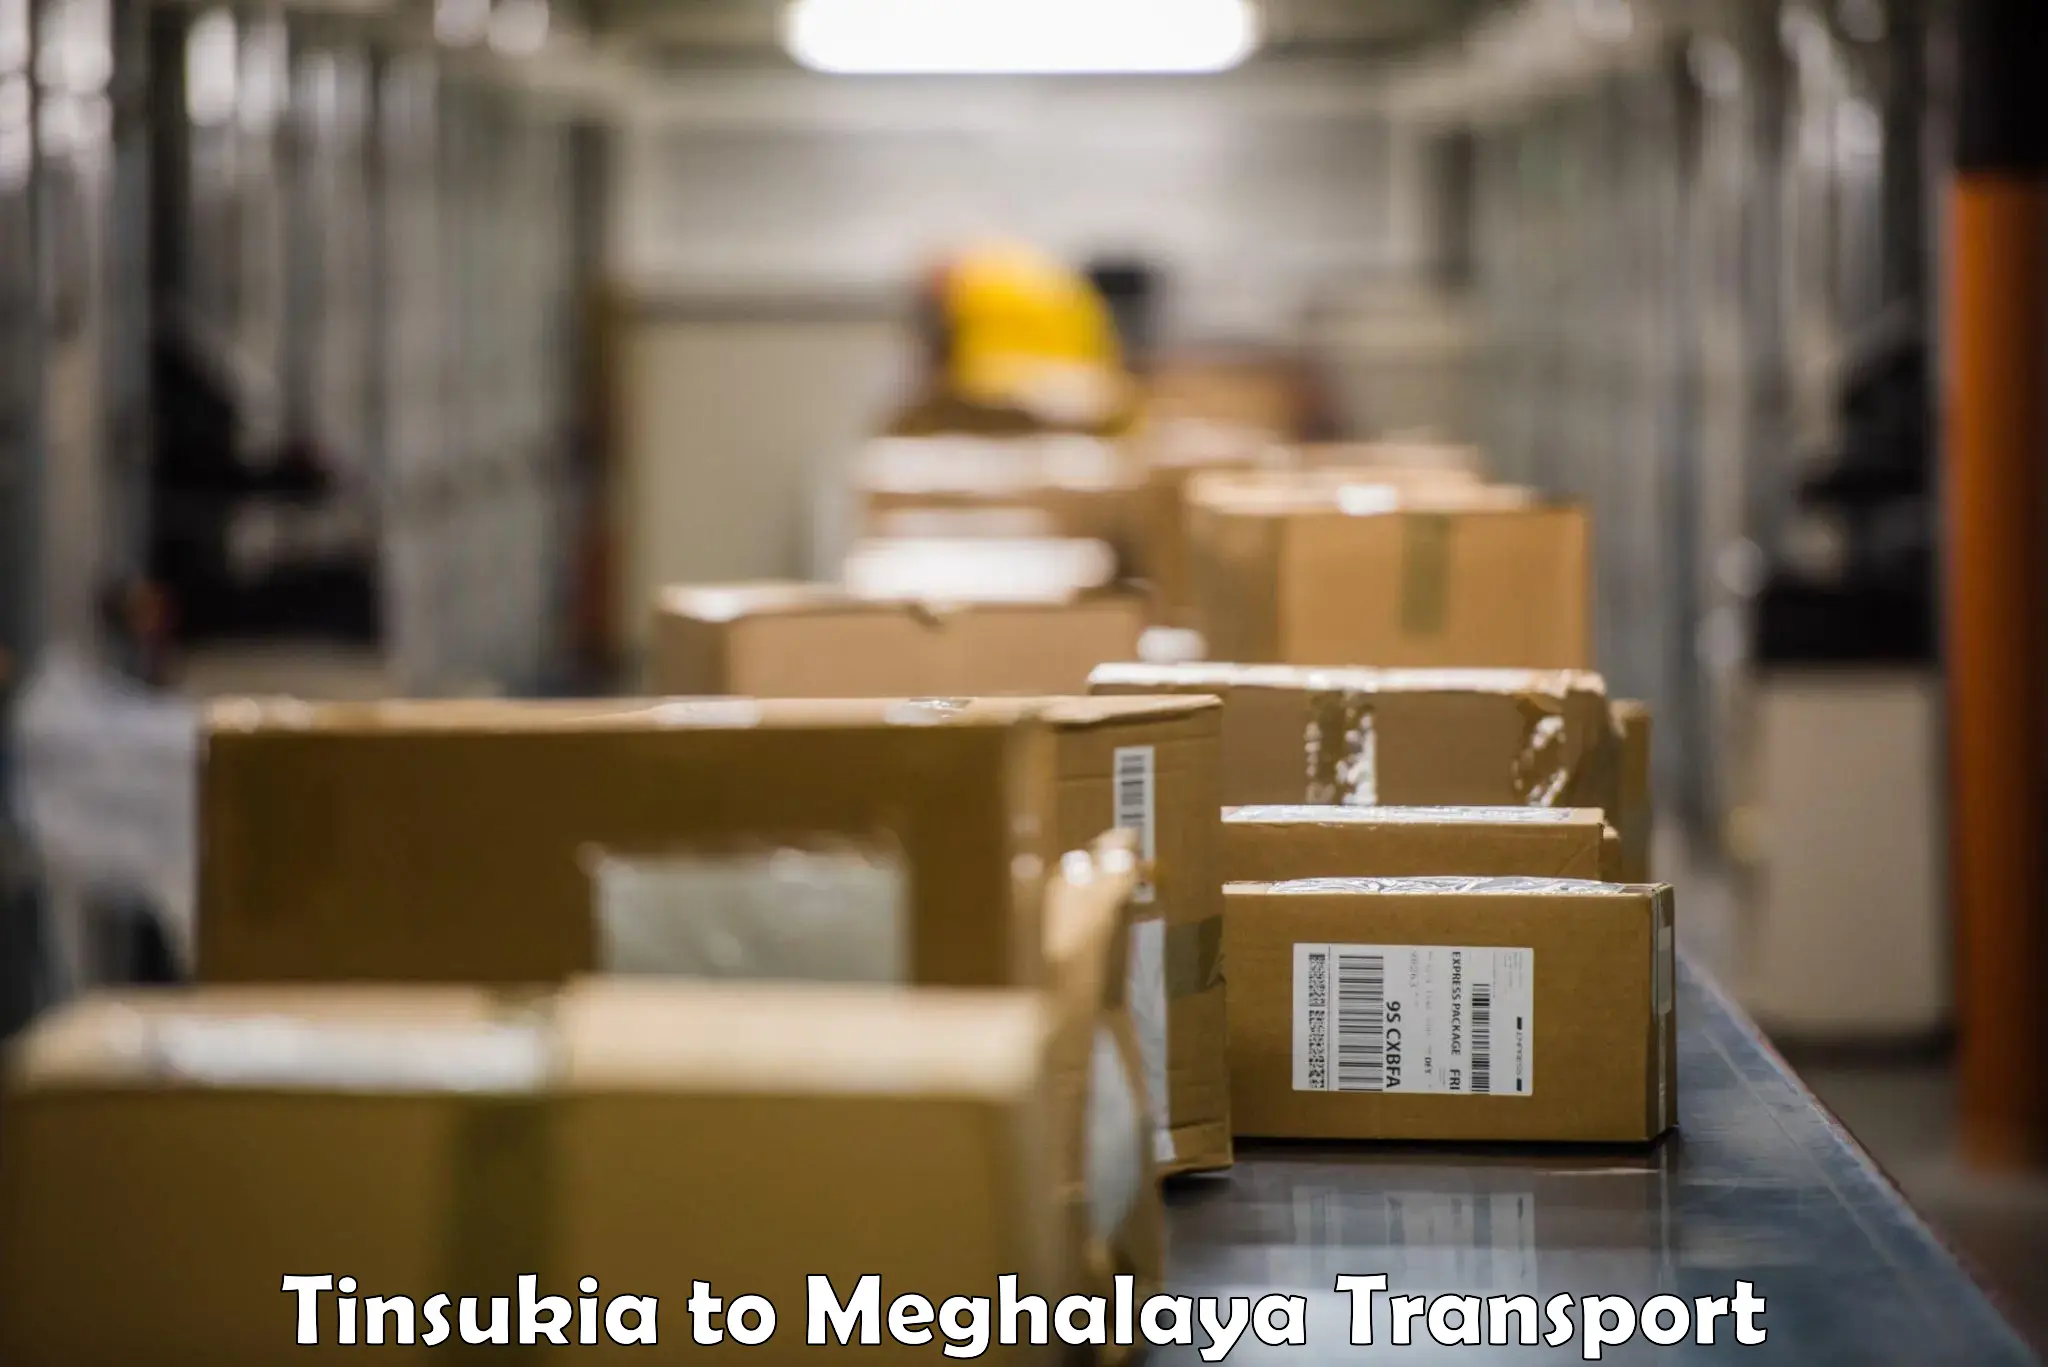 Goods delivery service Tinsukia to Umsaw